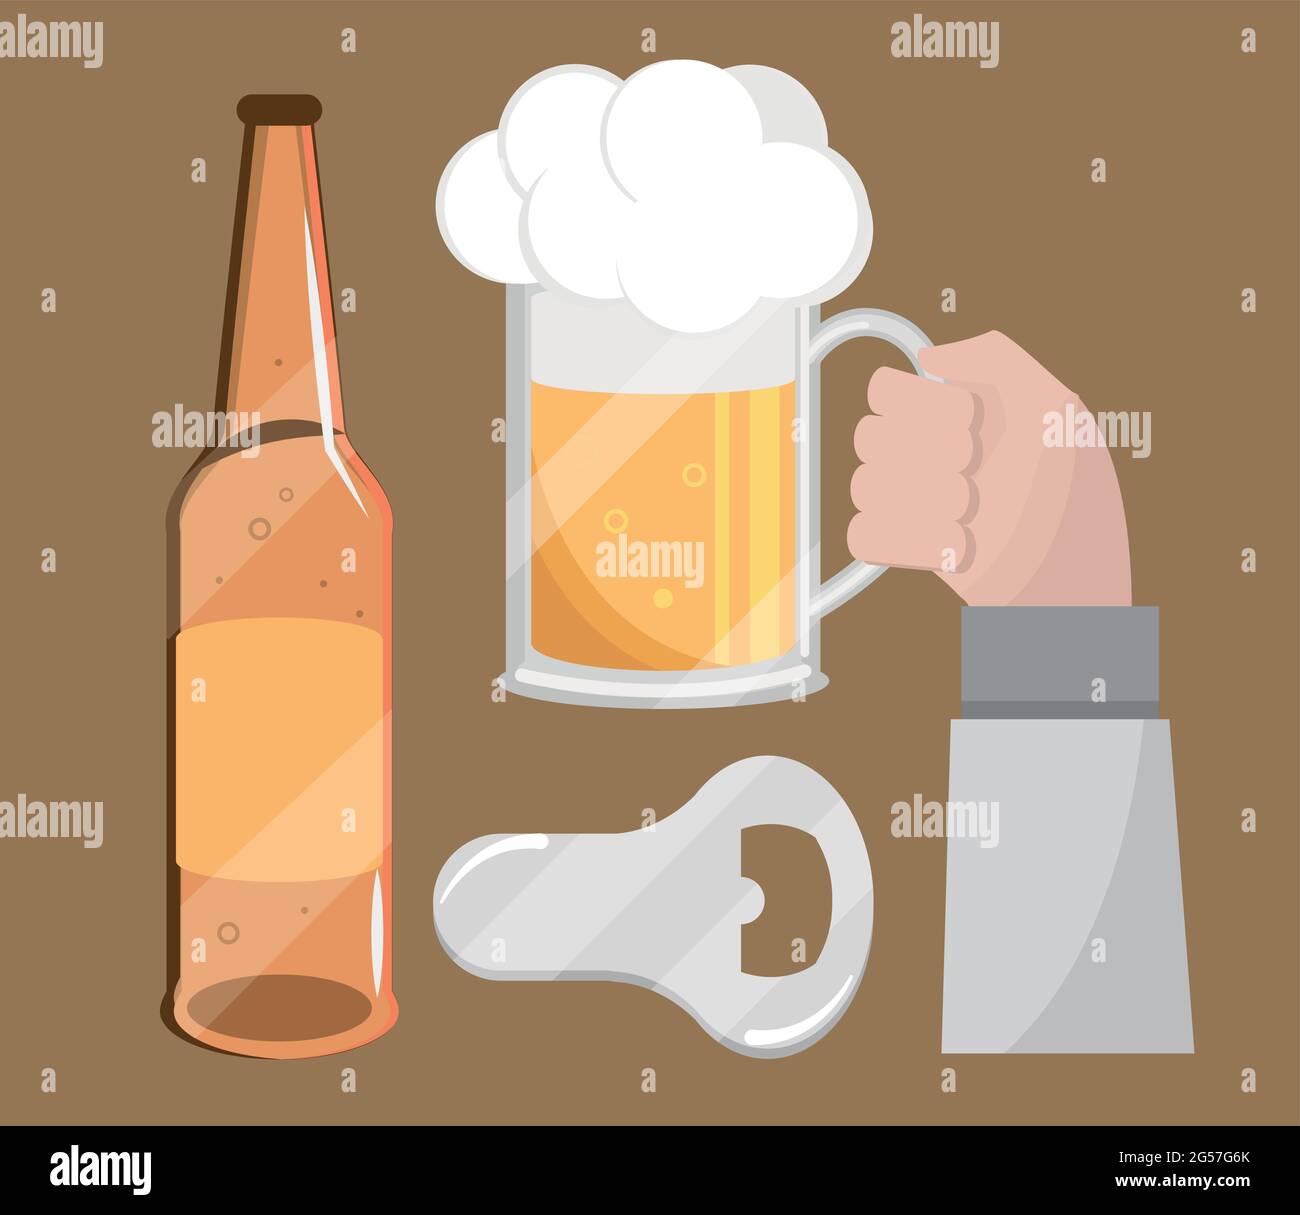 beer icon set Stock Vector